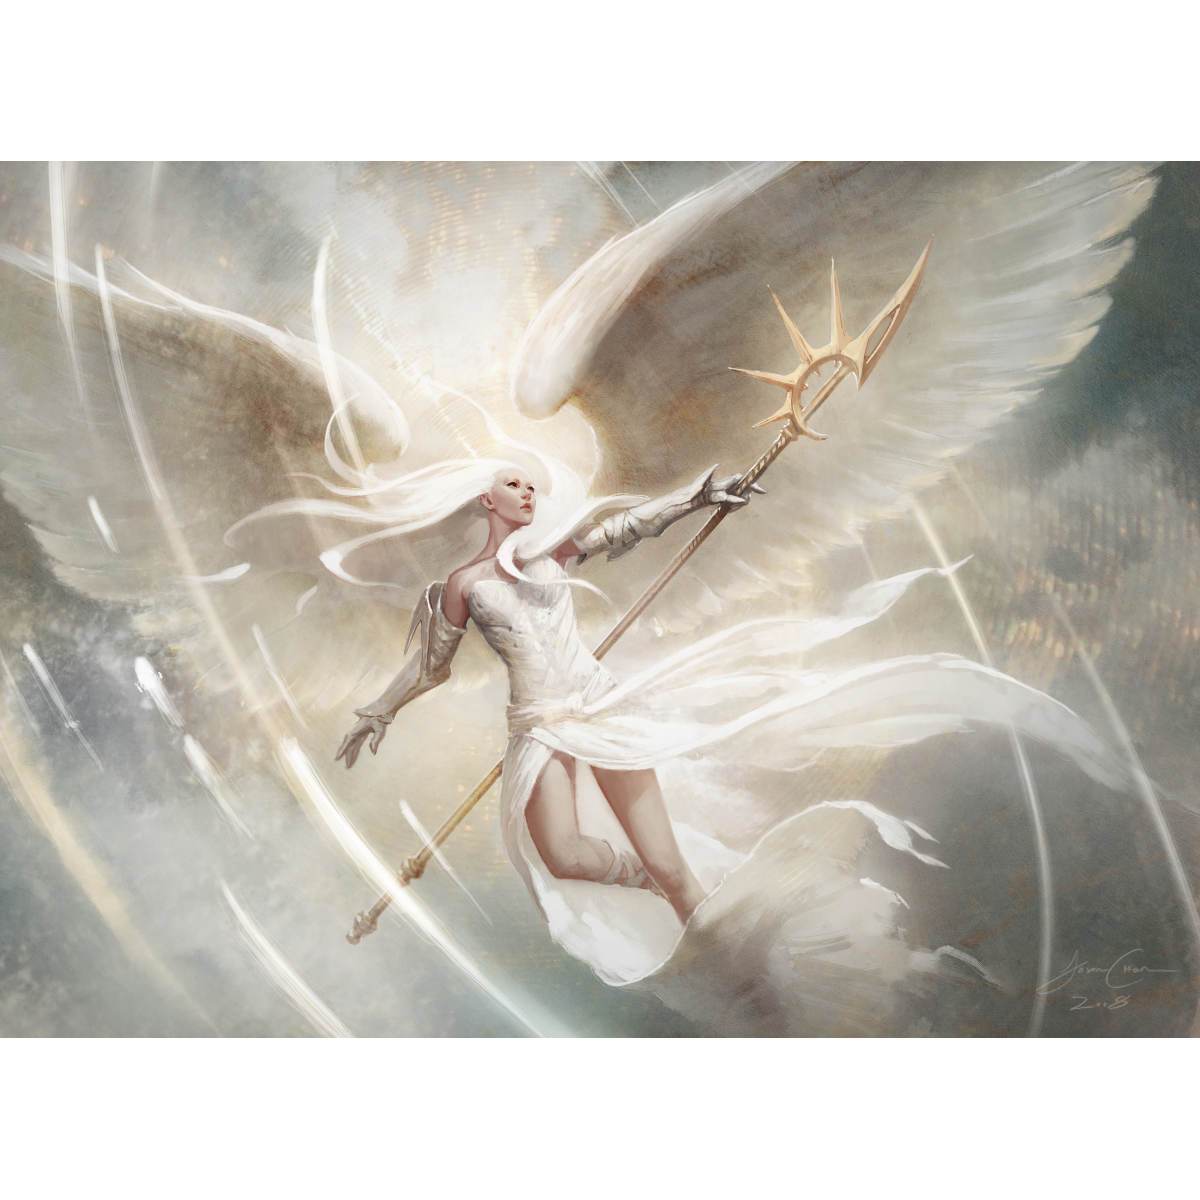 Luminous Angel Print - Print - Original Magic Art - Accessories for Magic the Gathering and other card games